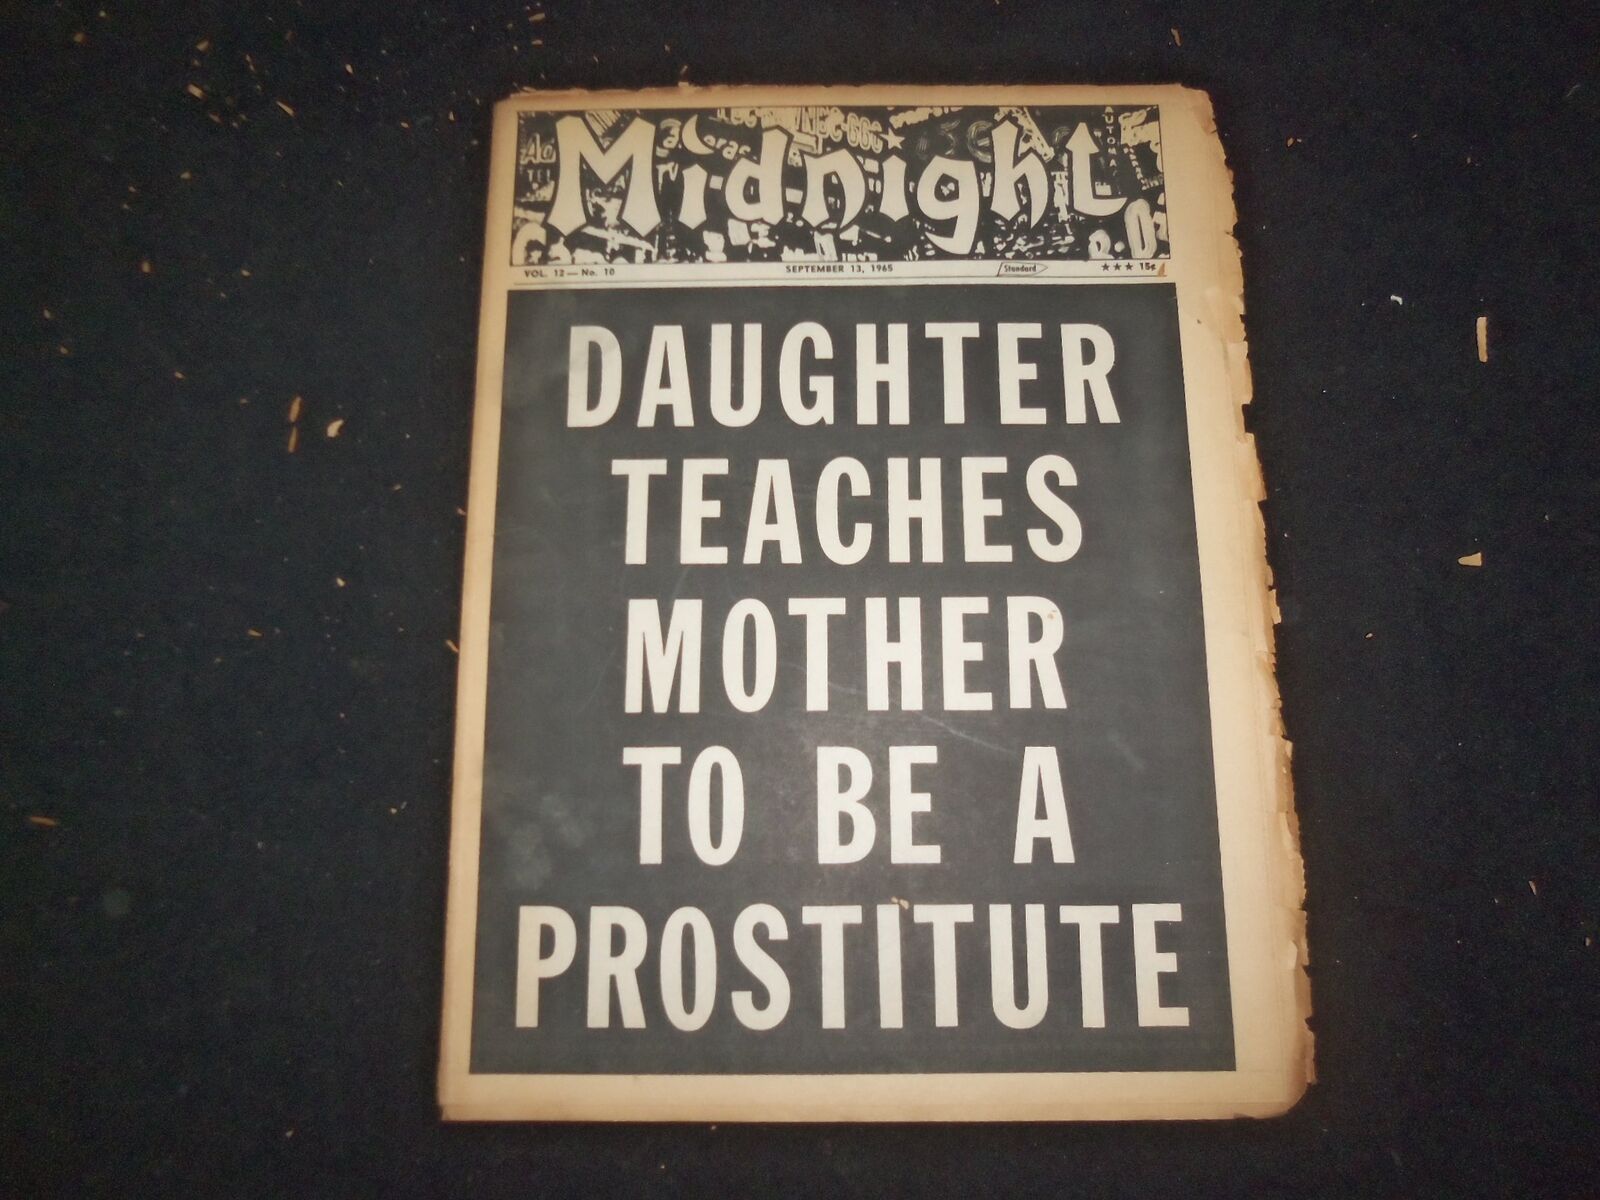 1965 SEP 13 MIDNIGHT NEWSPAPER-DAUGHTER TEACHES MOTHER TO BE PROSTITUTE- NP 7349